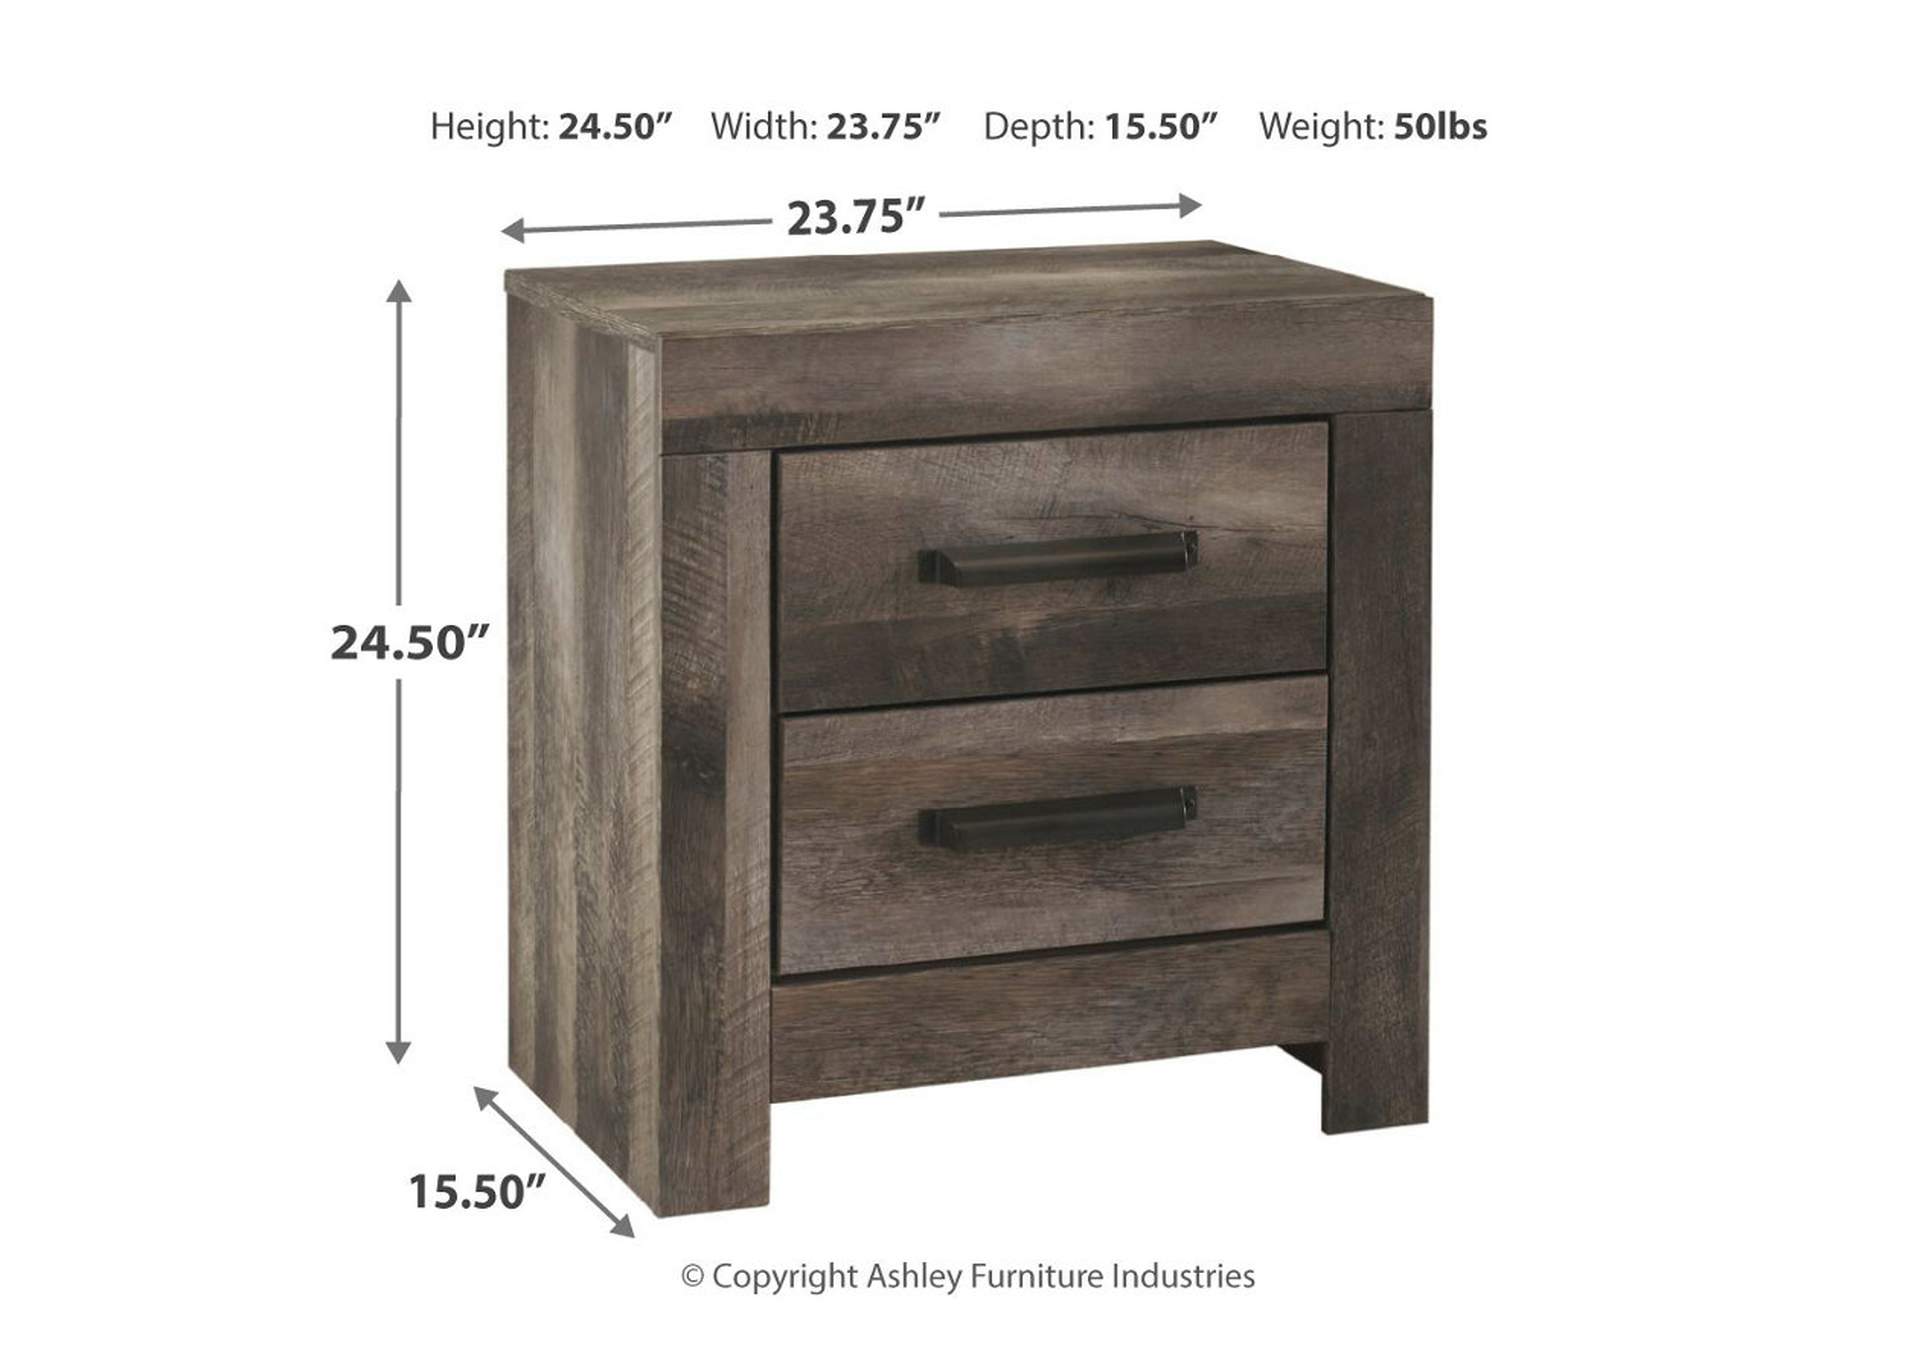 Wynnlow King Poster Bed, Dresser, Mirror and 2 Nightstands,Signature Design By Ashley